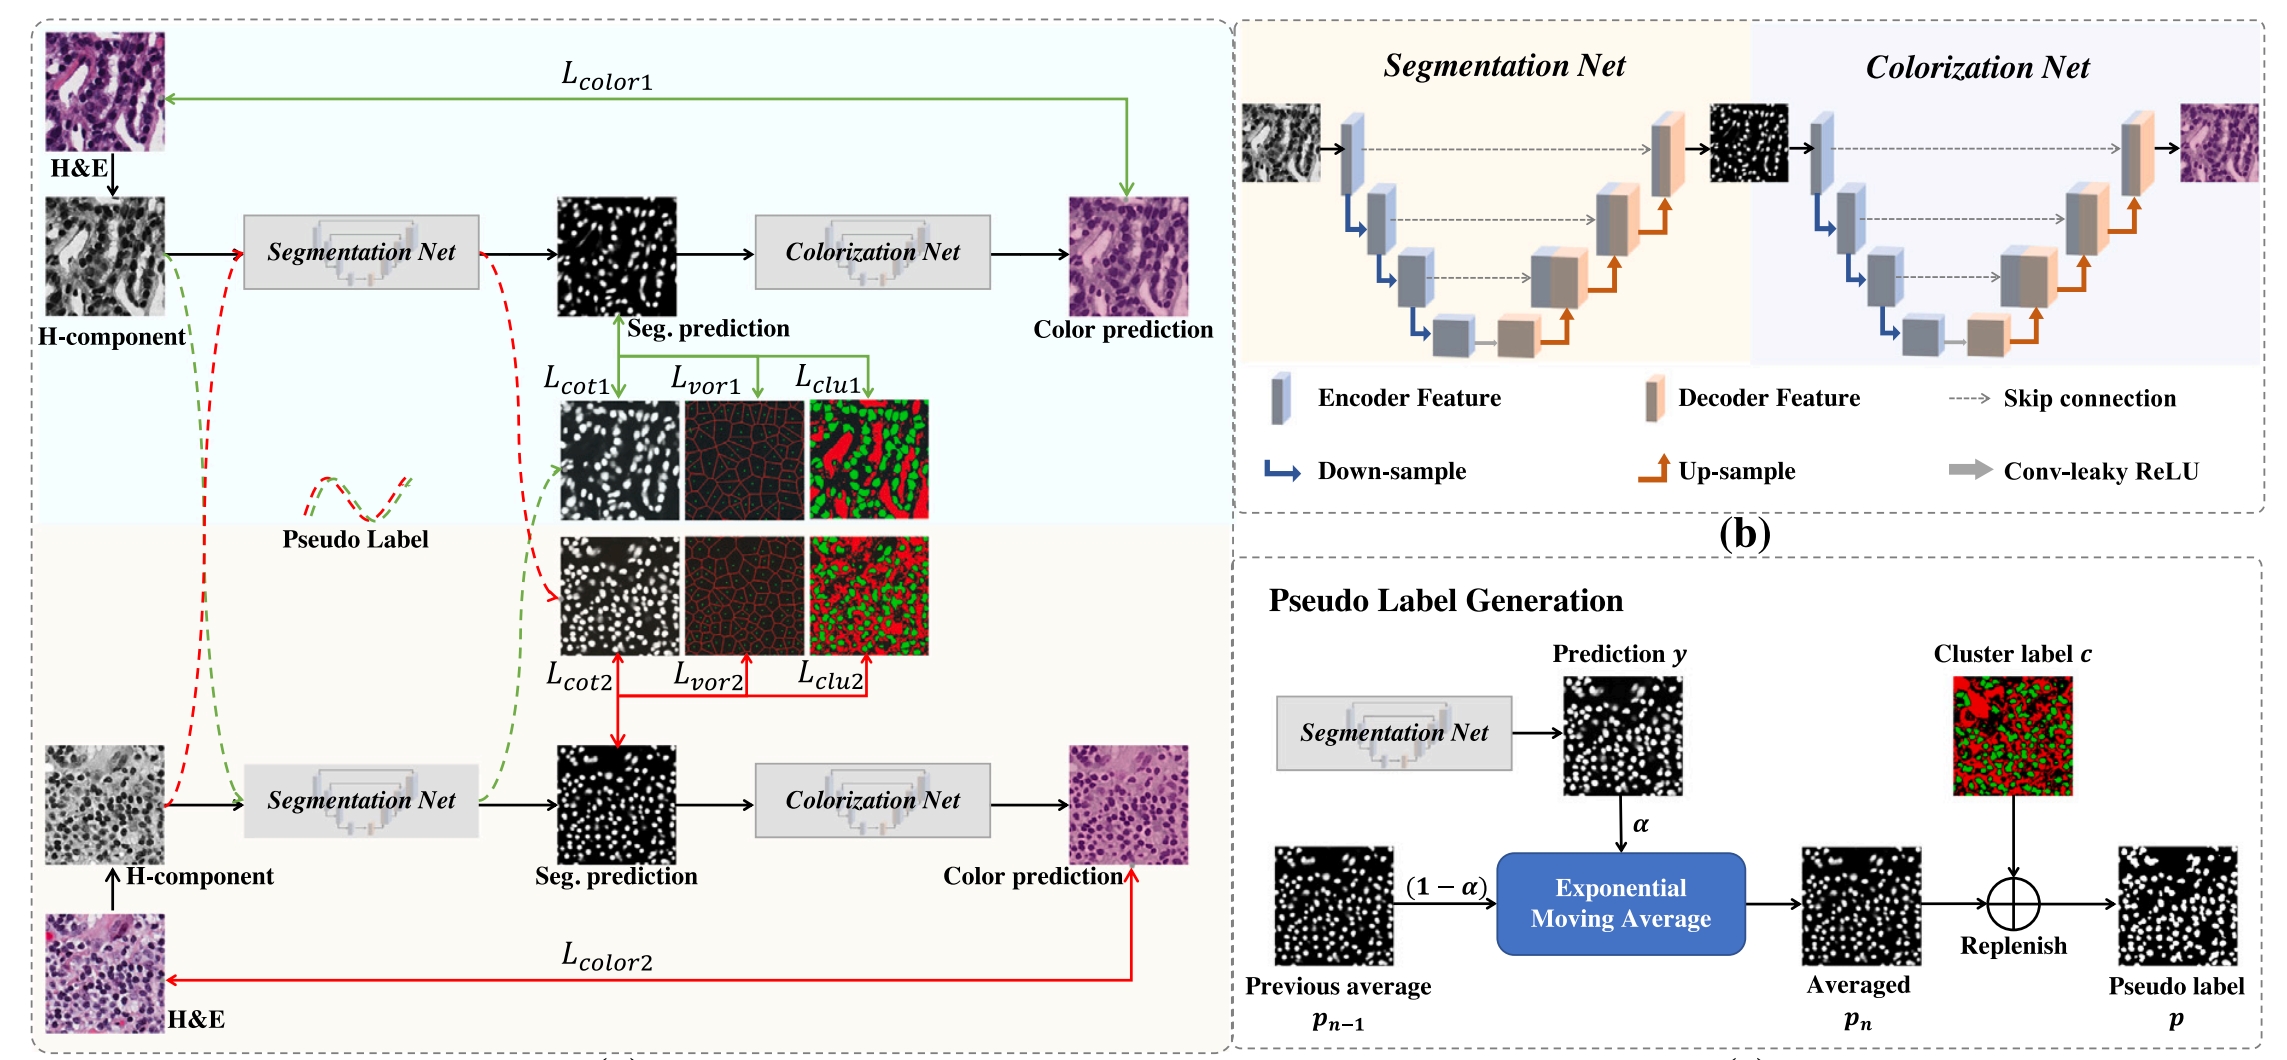 Nuclei segmentation with point annotations from pathology images via self-supervised learning and co-training